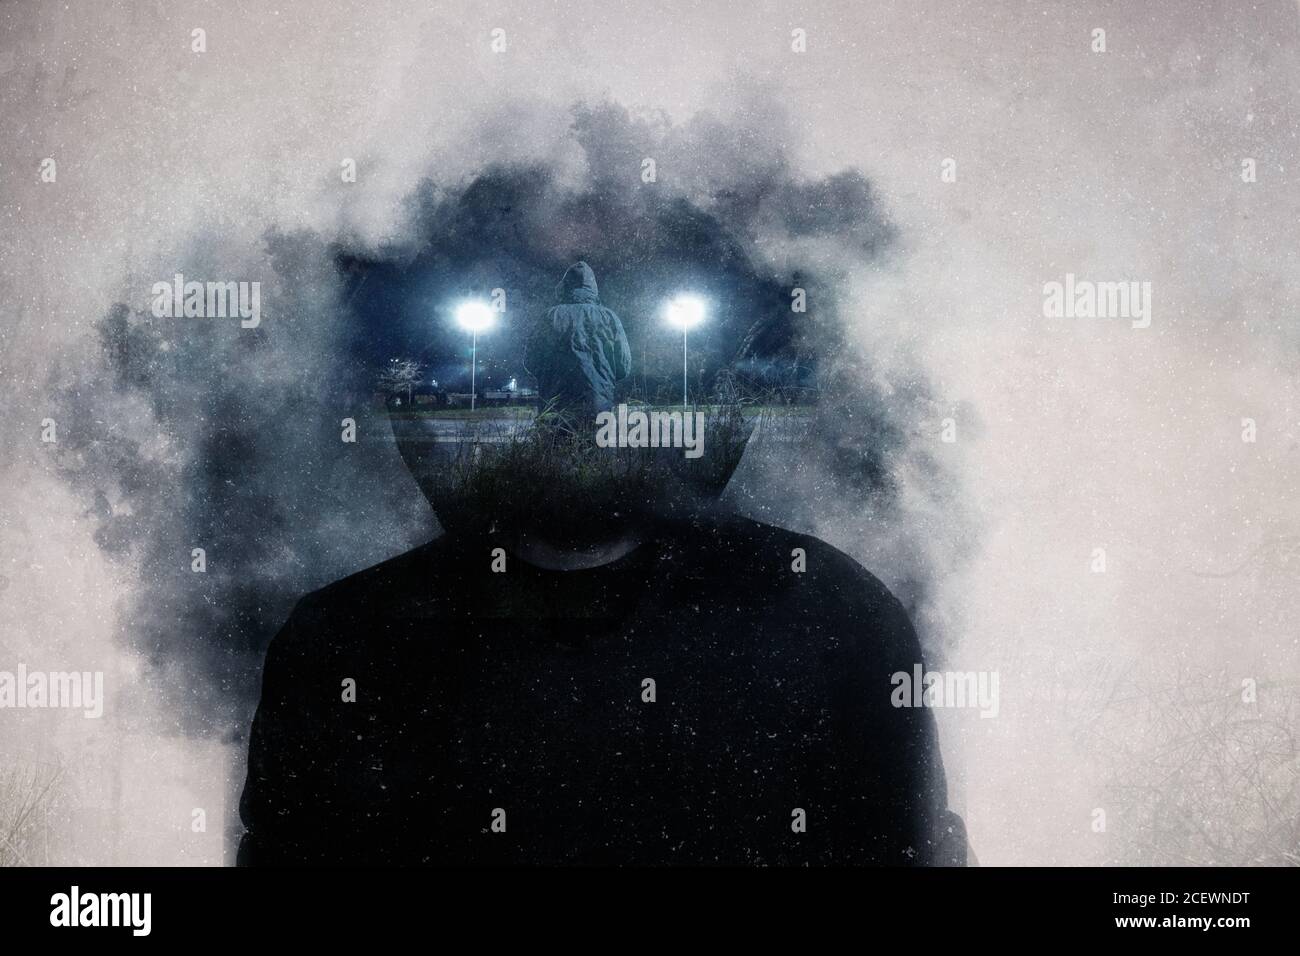 A mental health concept. A mans head covered in clouds. With a double exposure of a mans standing next to two glowing street lights Stock Photo